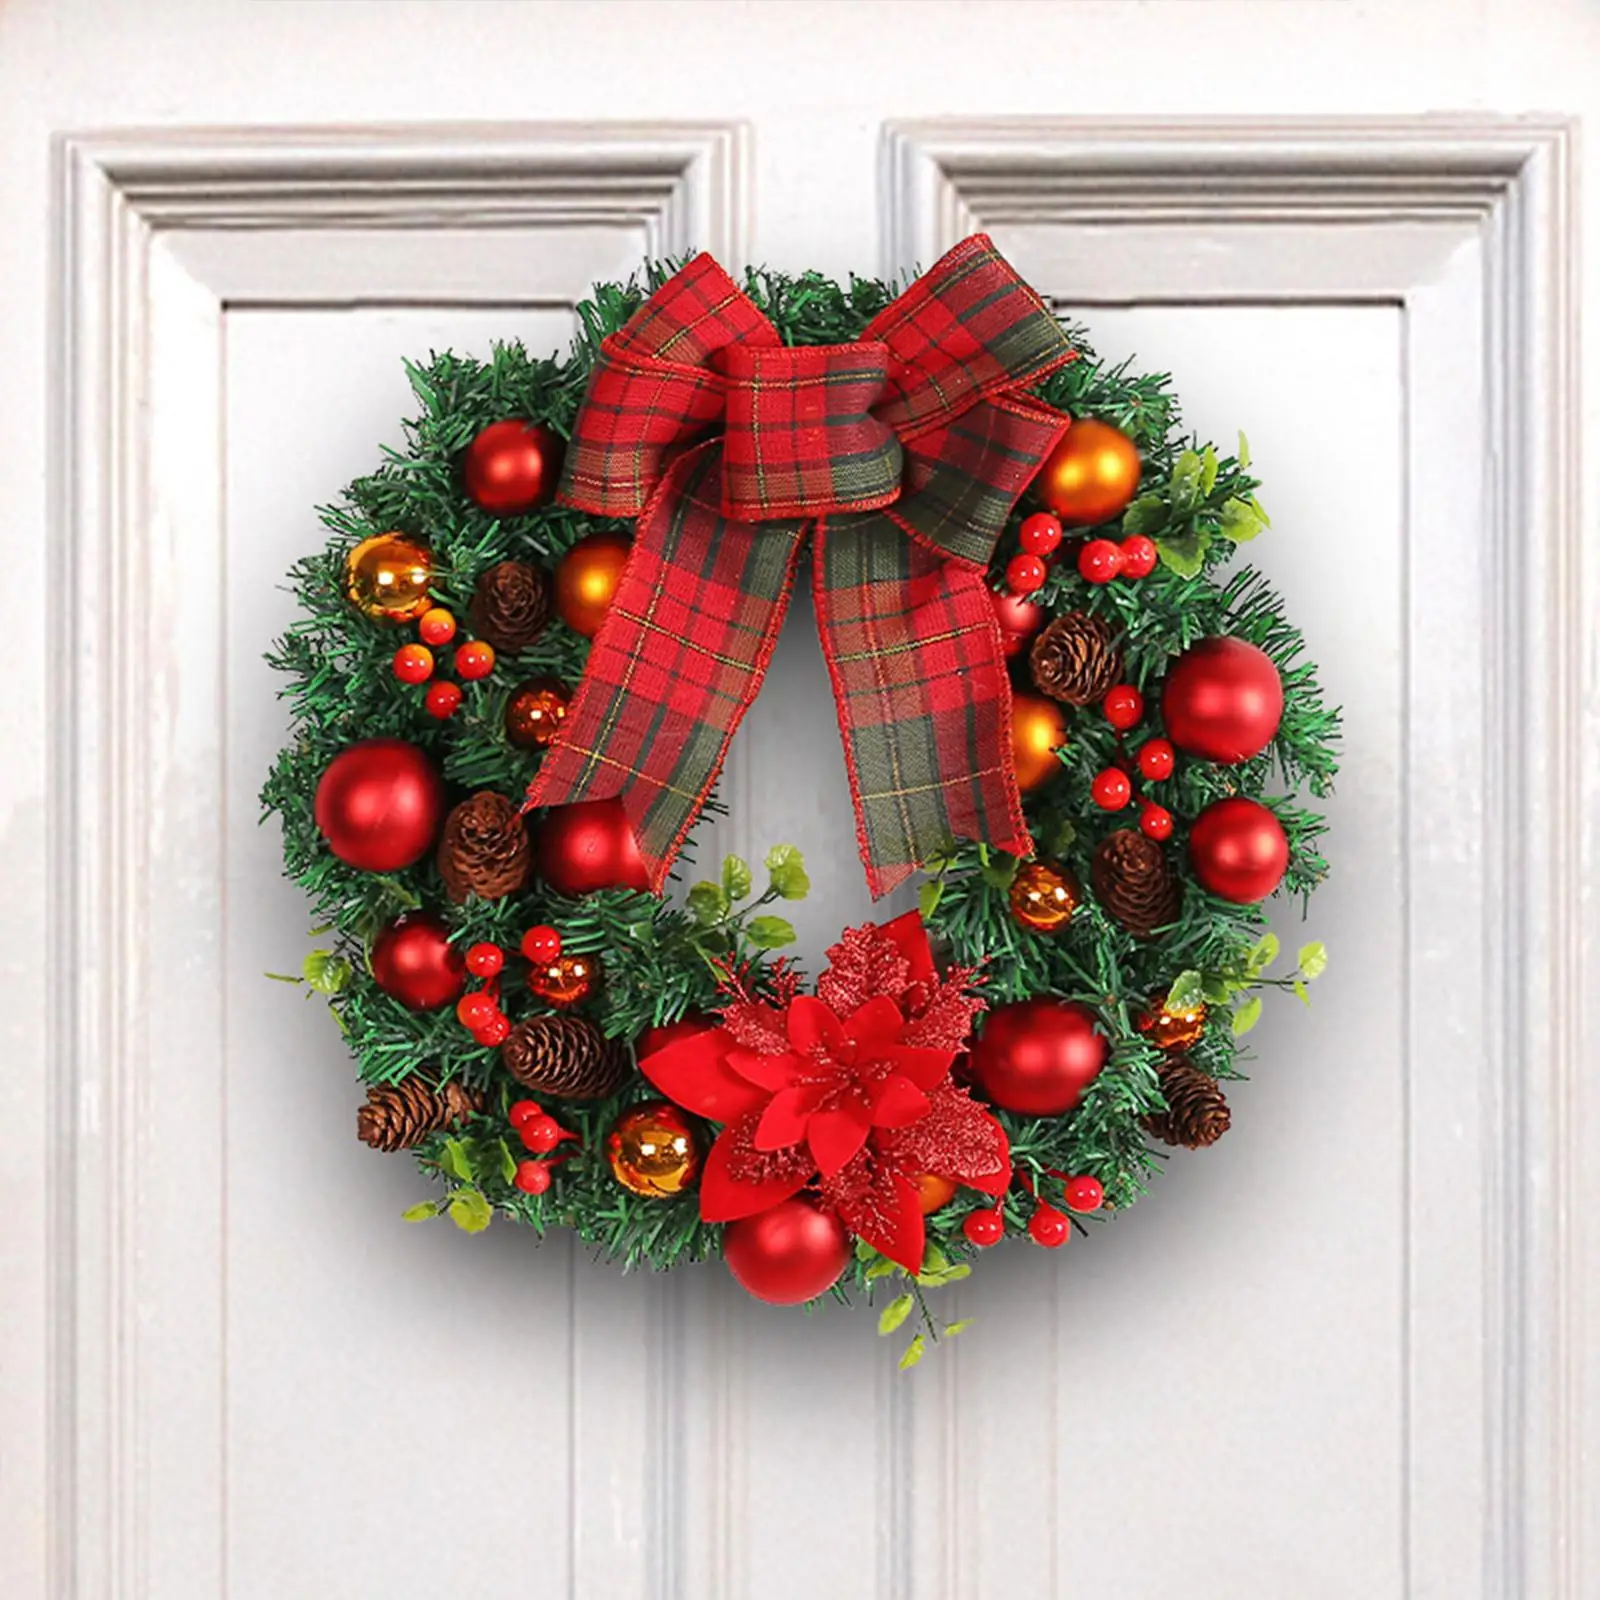 Artificial Christmas Wreath Decorations Red Berries Wreath for Front Door Holiday Garland for Window Festival Office Hotel Porch